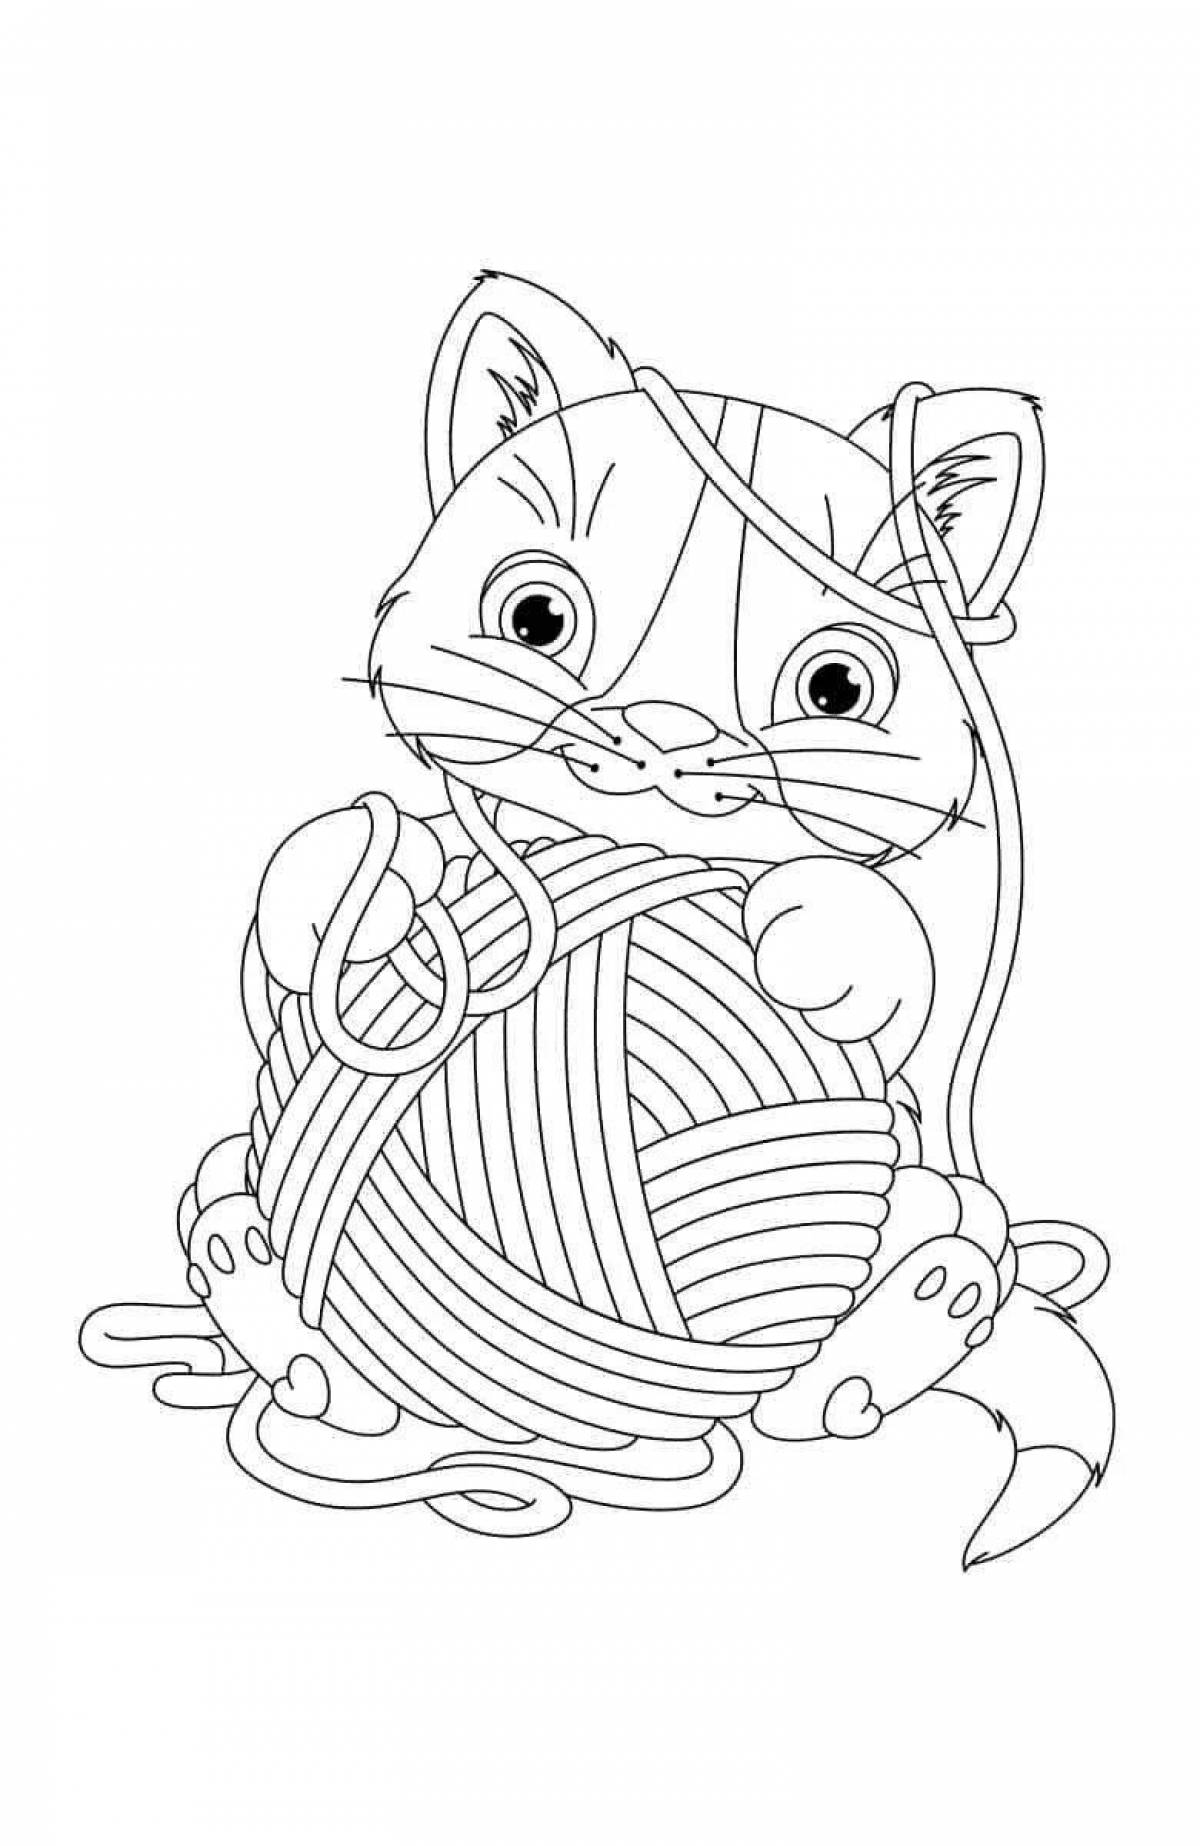 Amazing ball coloring page for kids